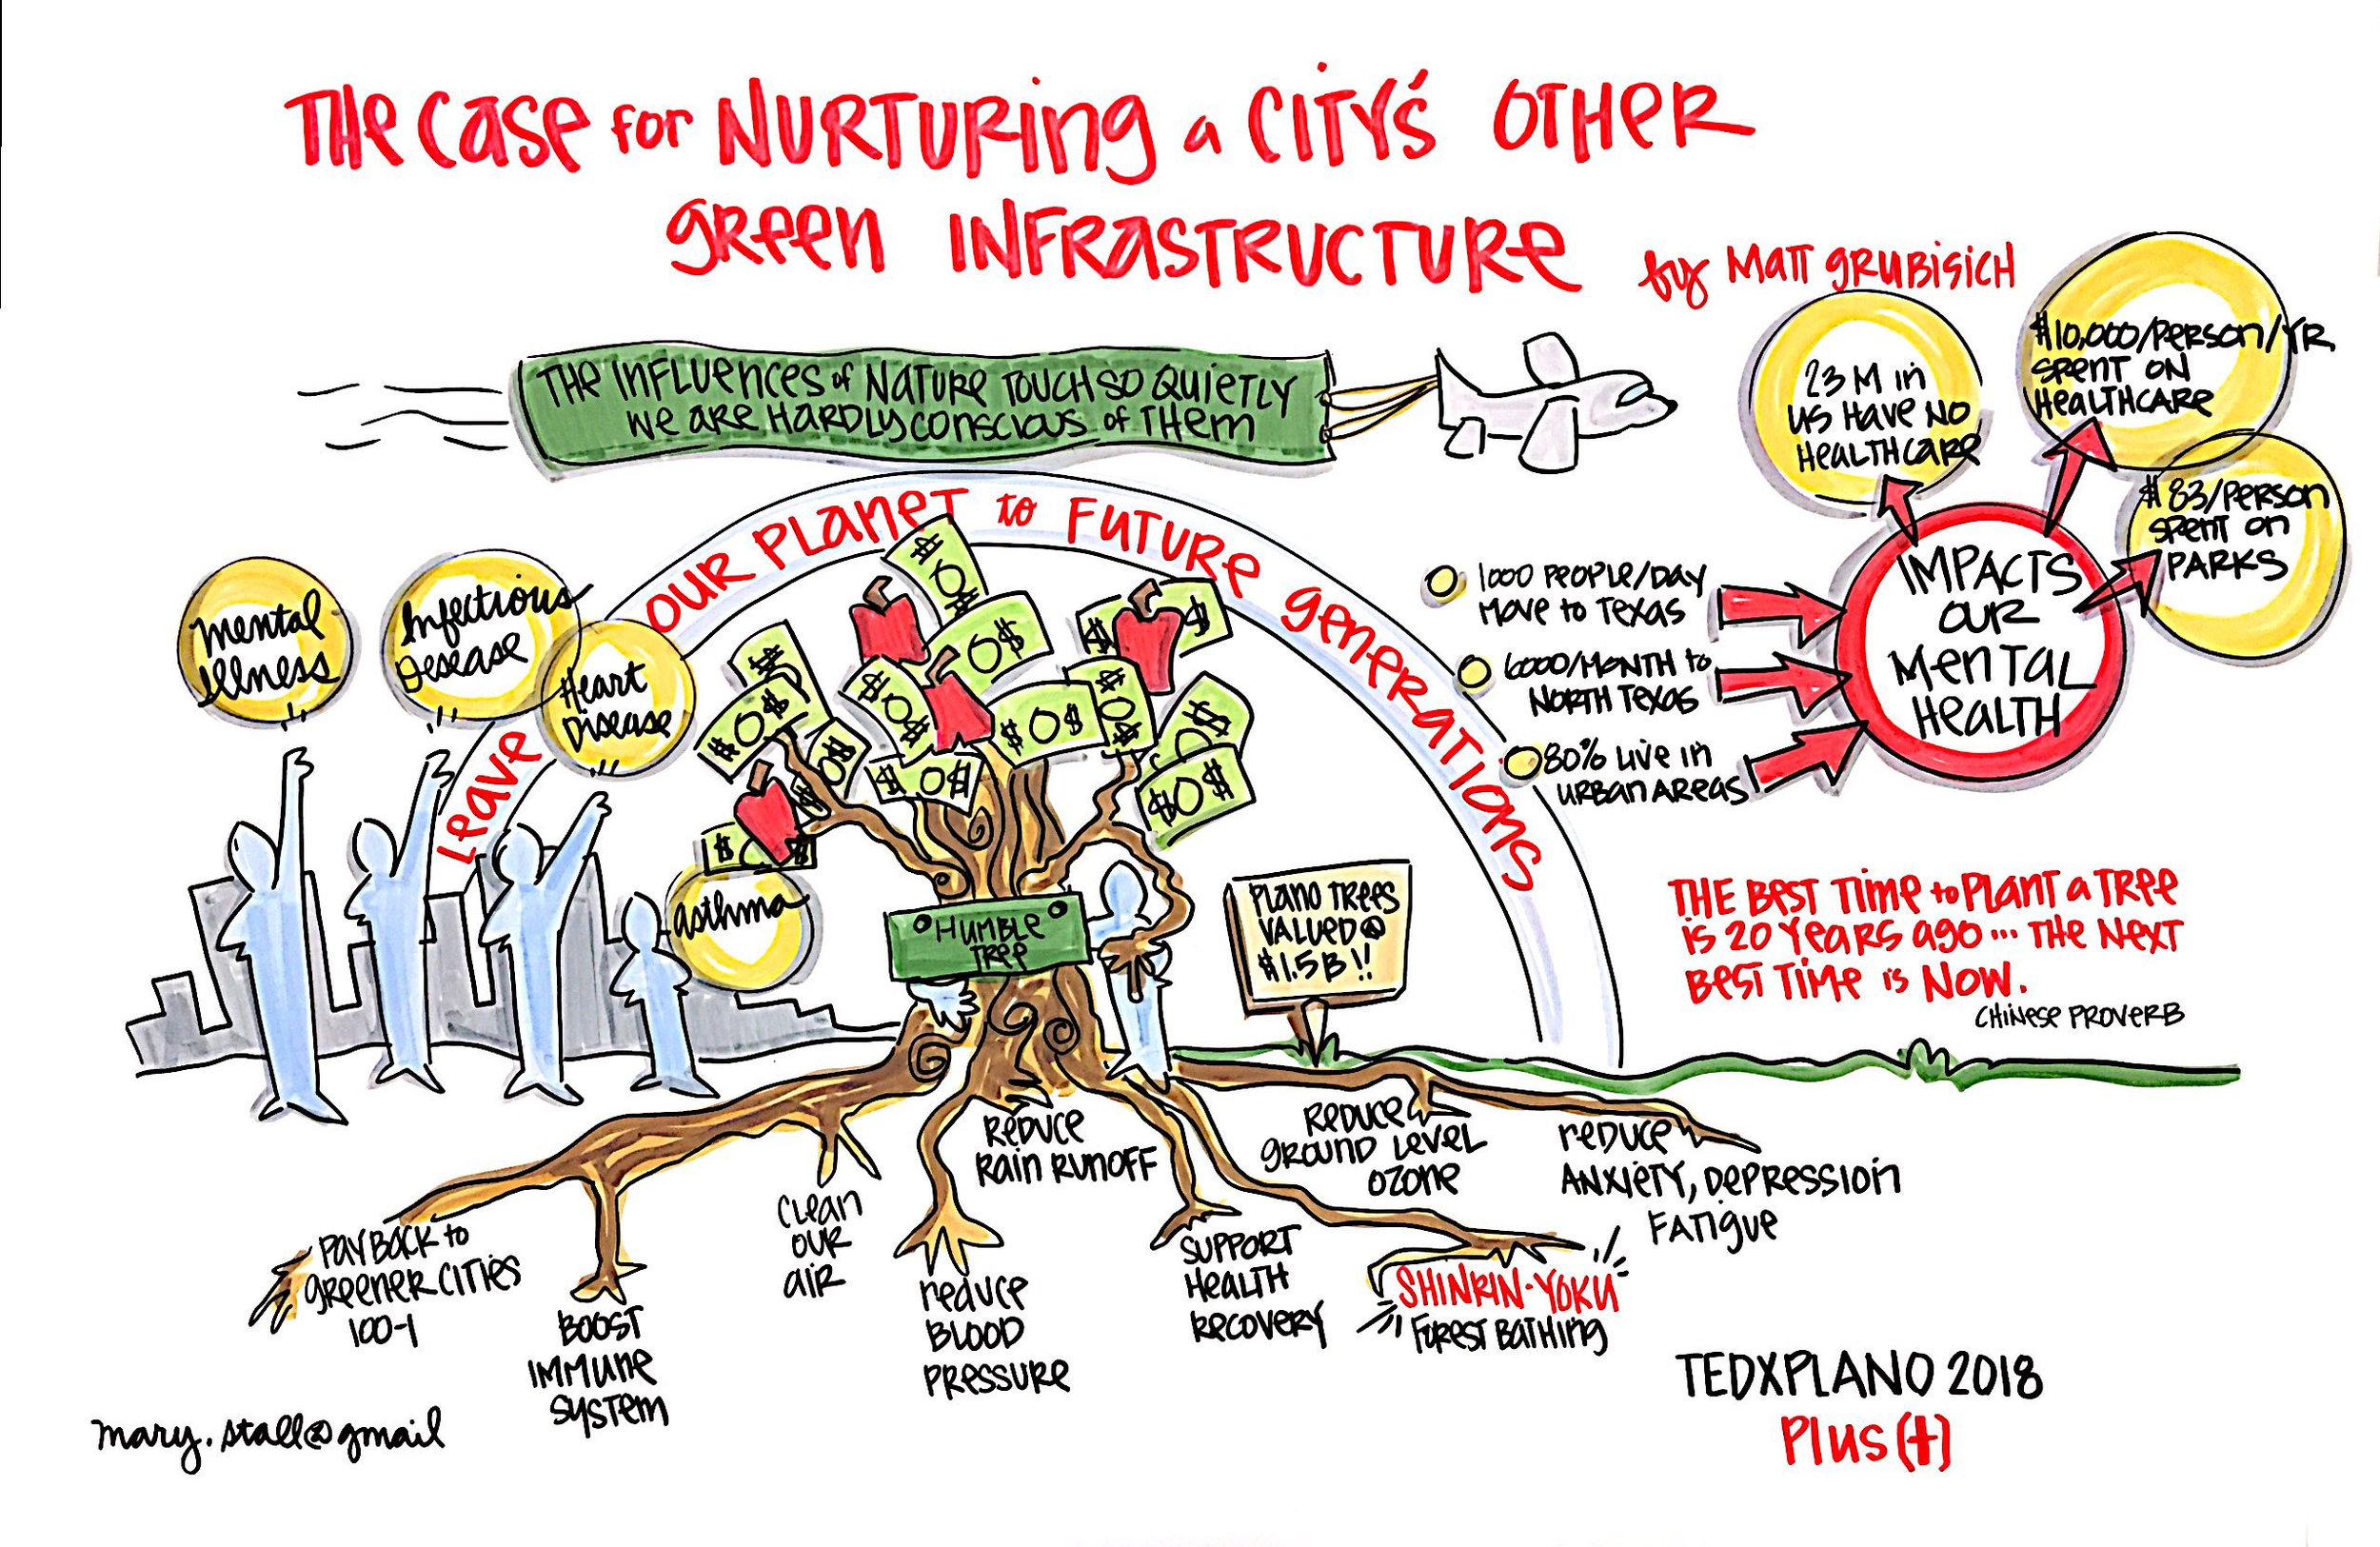 The Case for Nurturing a Citys Other Green Infrastructure.jpg